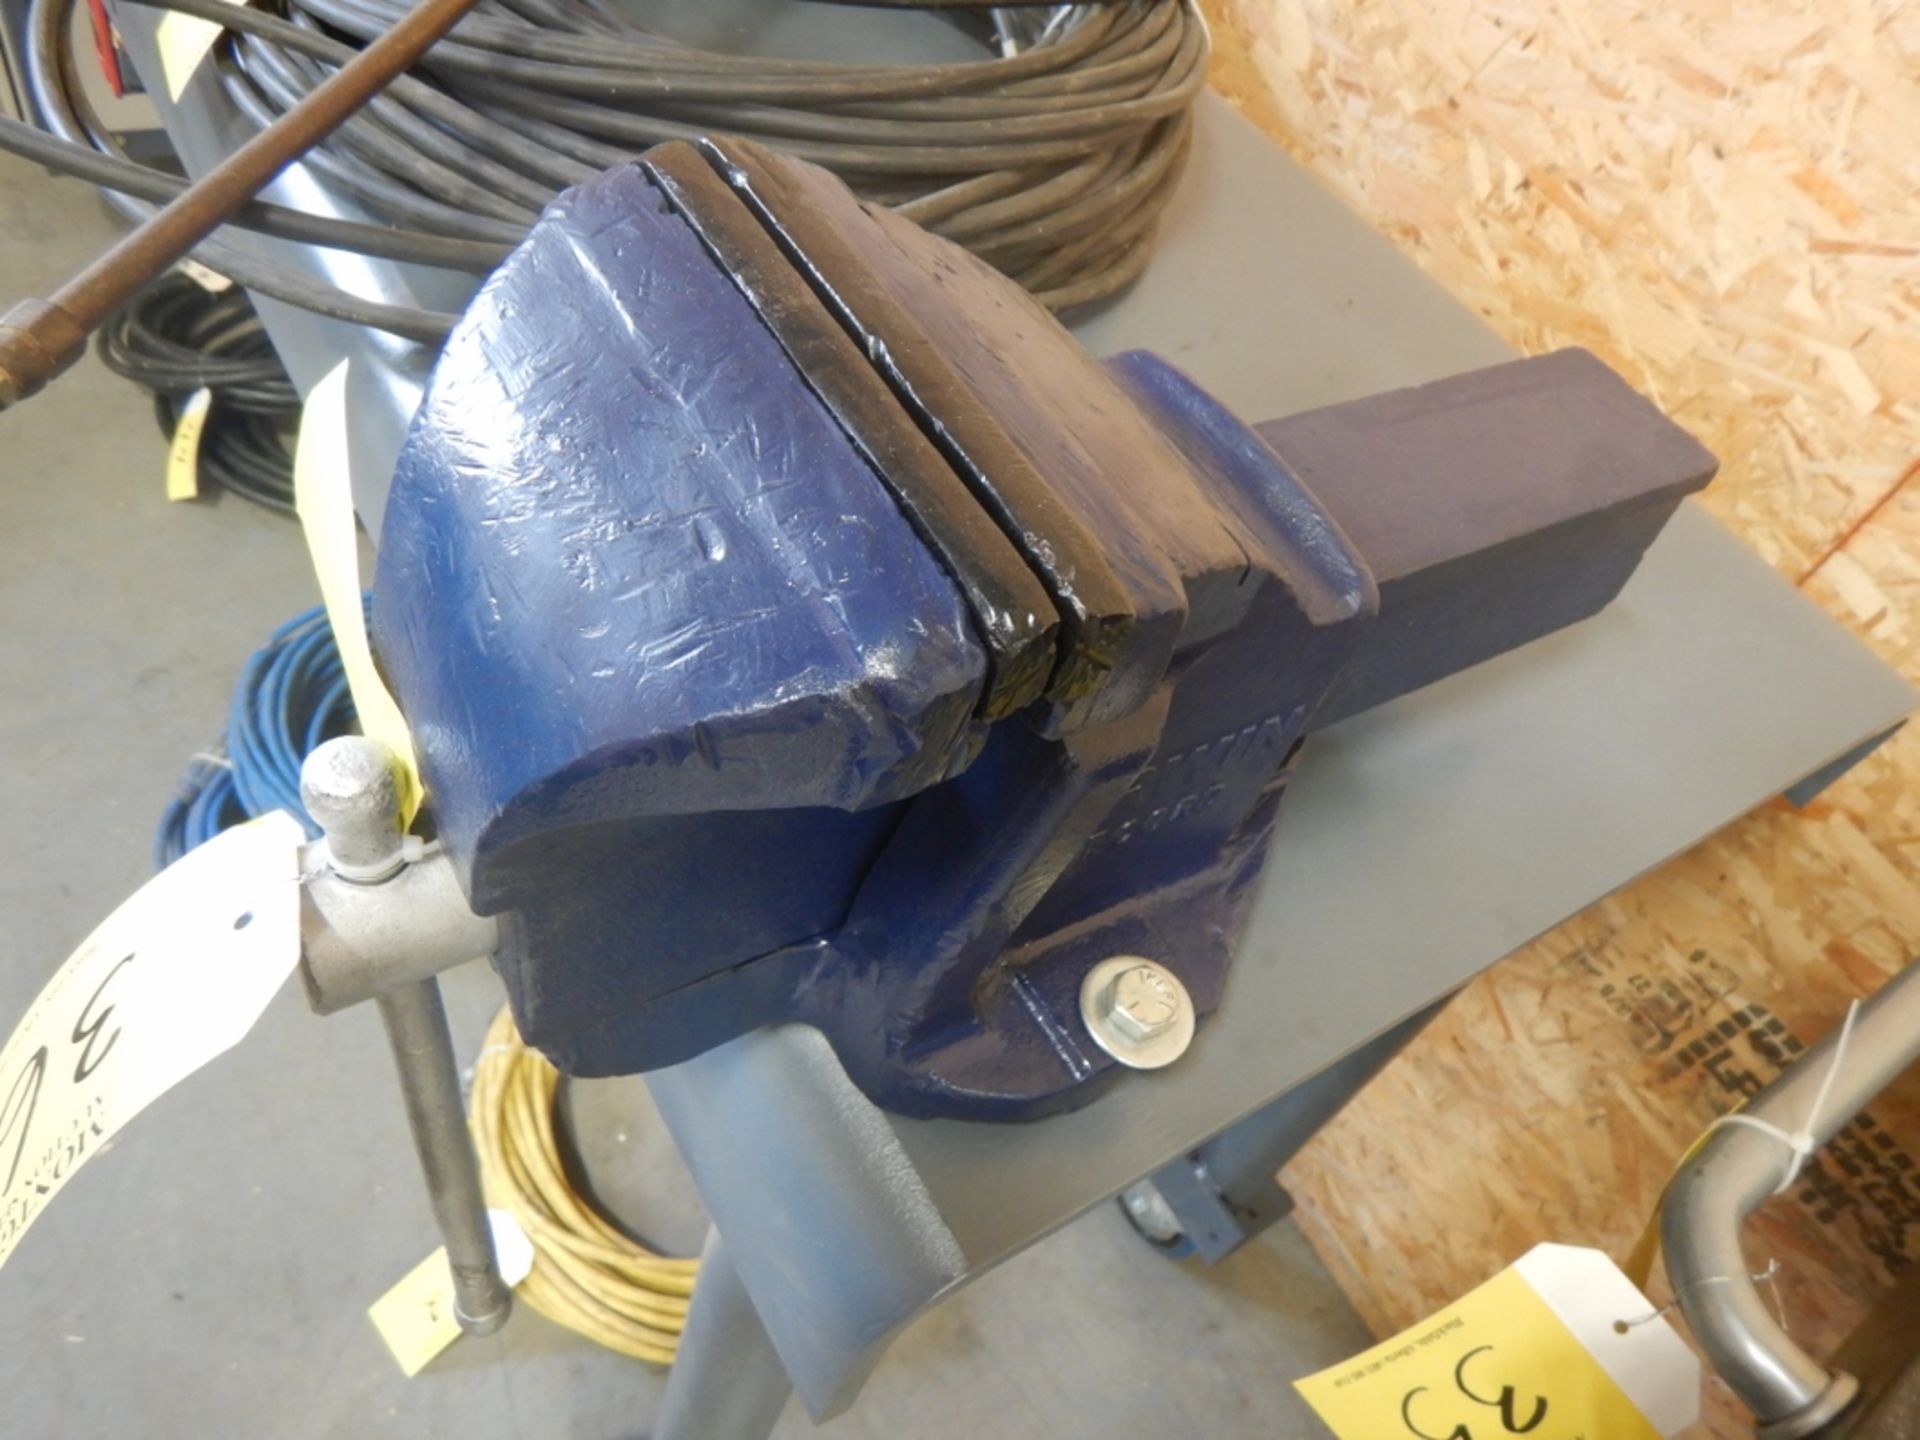 STEEL WELDING TABLE 24IN X 96IN W/ 6IN BENCH VISE, POWER AND AIR OUTLETS, HOSES, POWER CORDS - Image 7 of 7